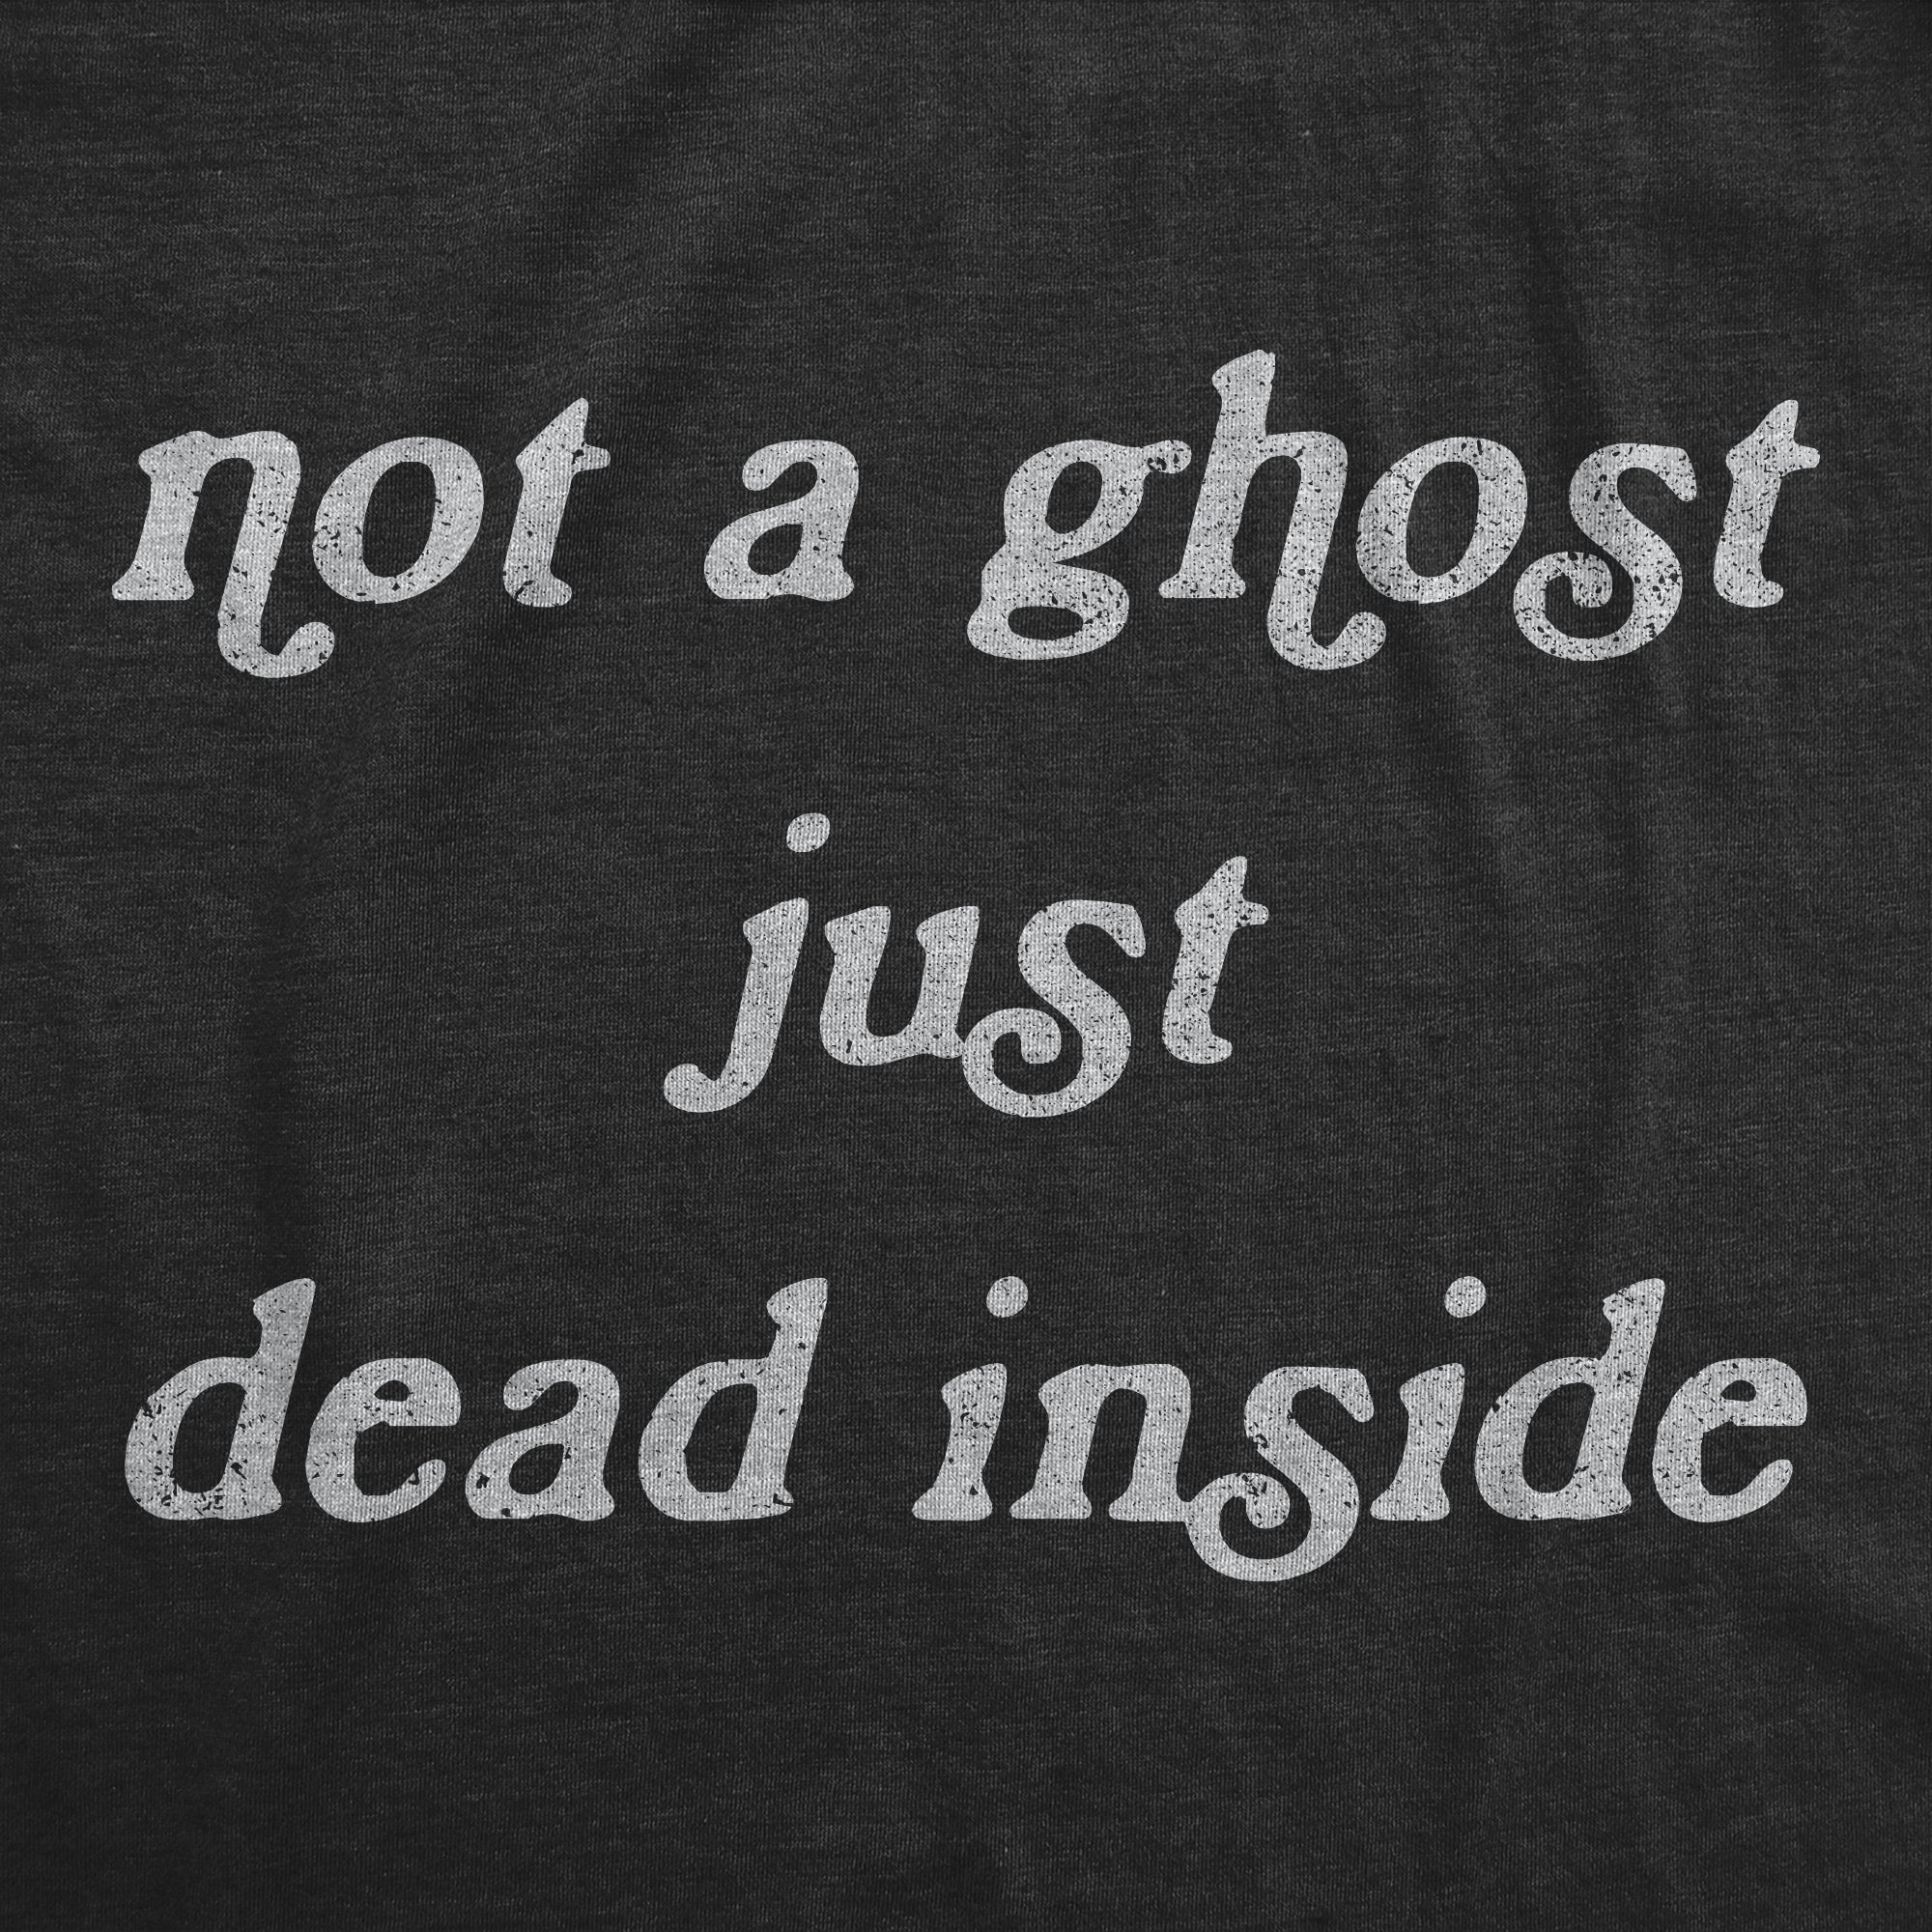 Funny Heather Black - Not a Ghost Not A Ghost Just Dead Inside Womens T Shirt Nerdy Halloween Tee